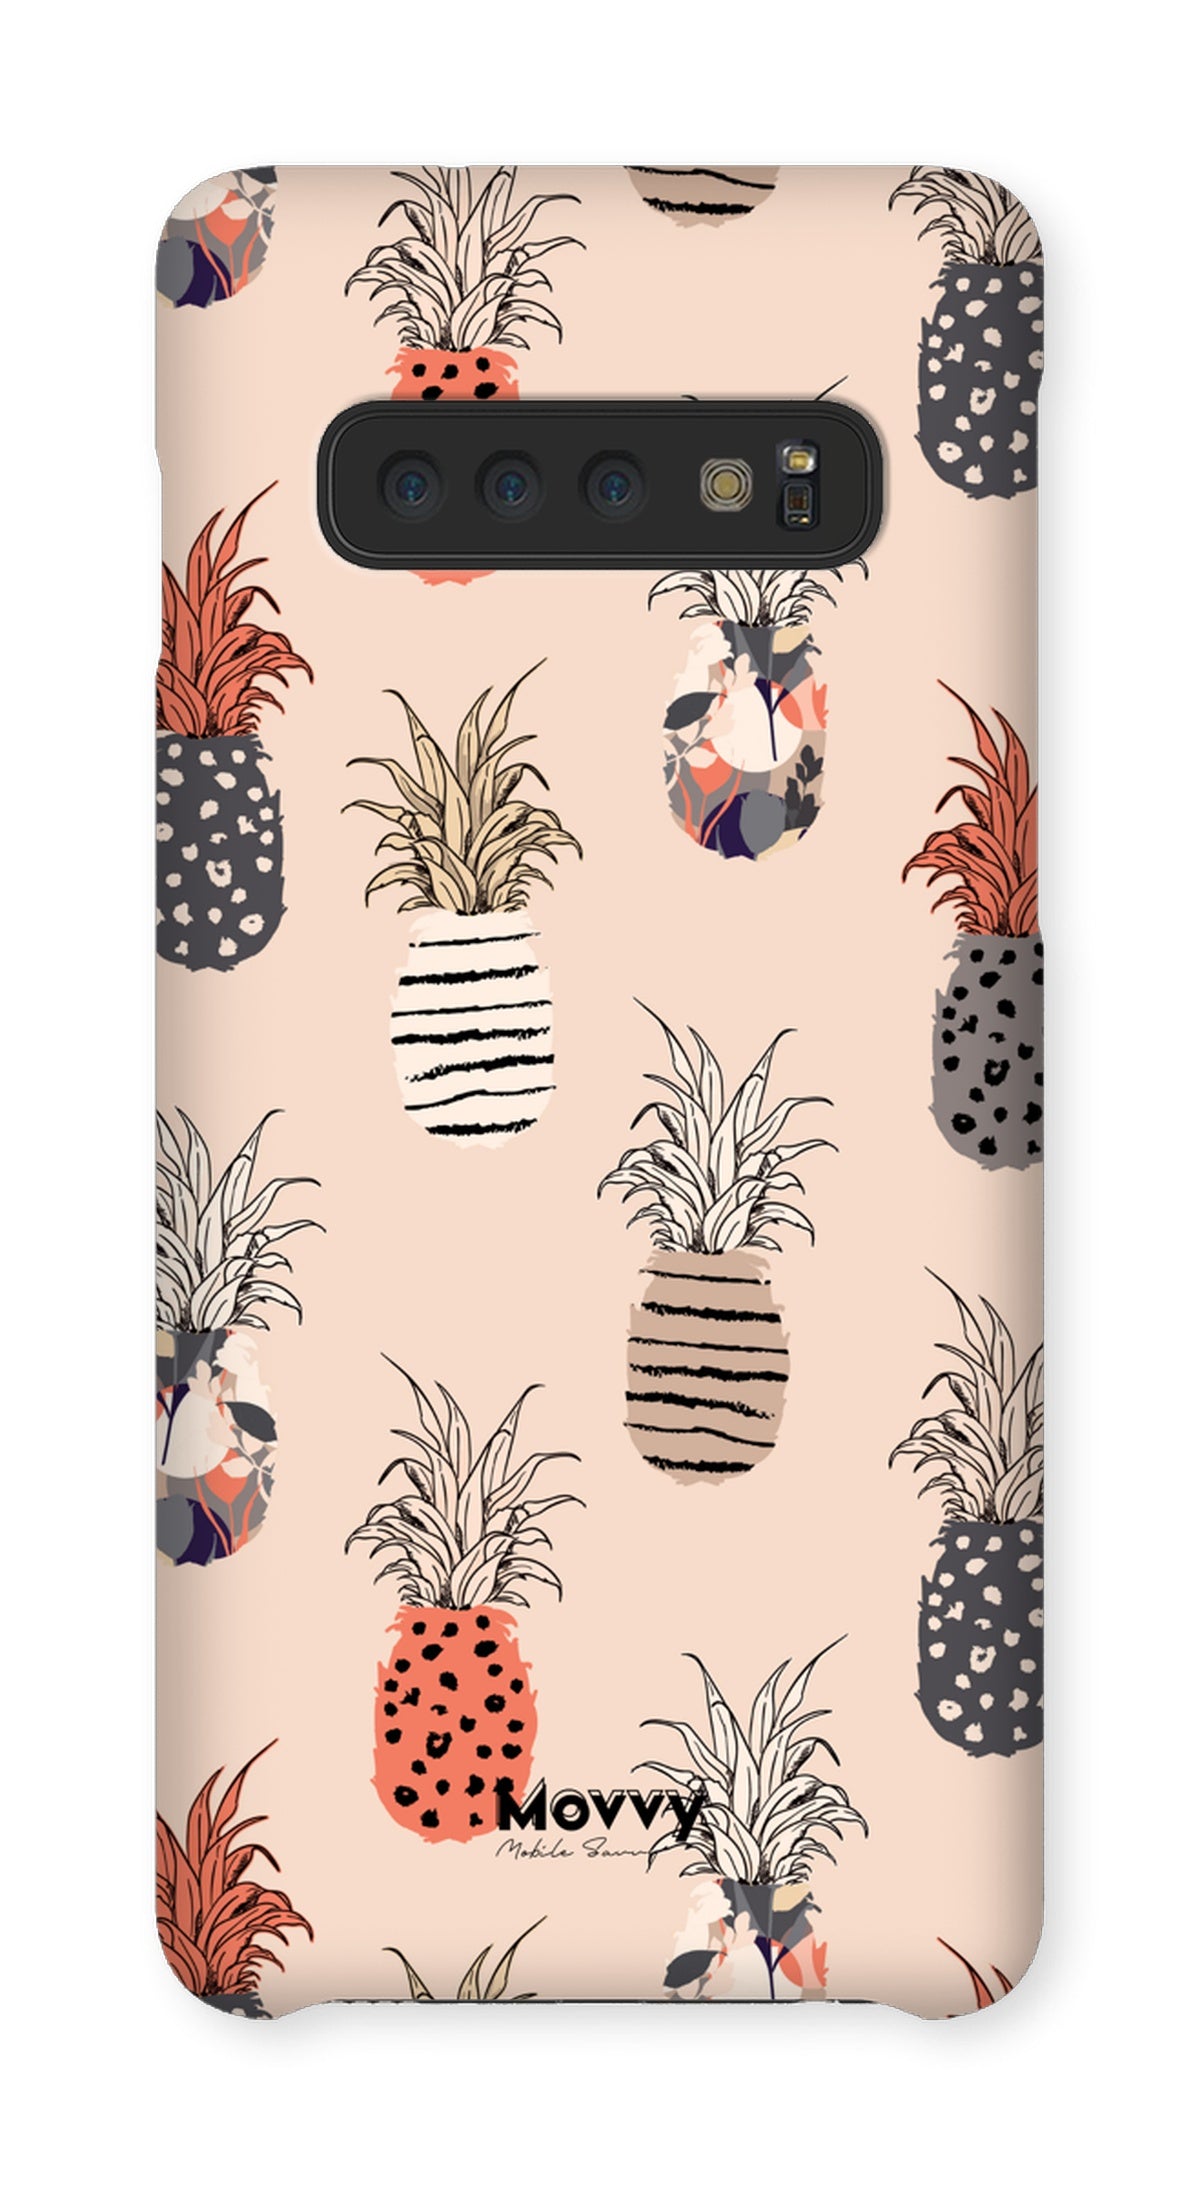 Pineapples in the Wild